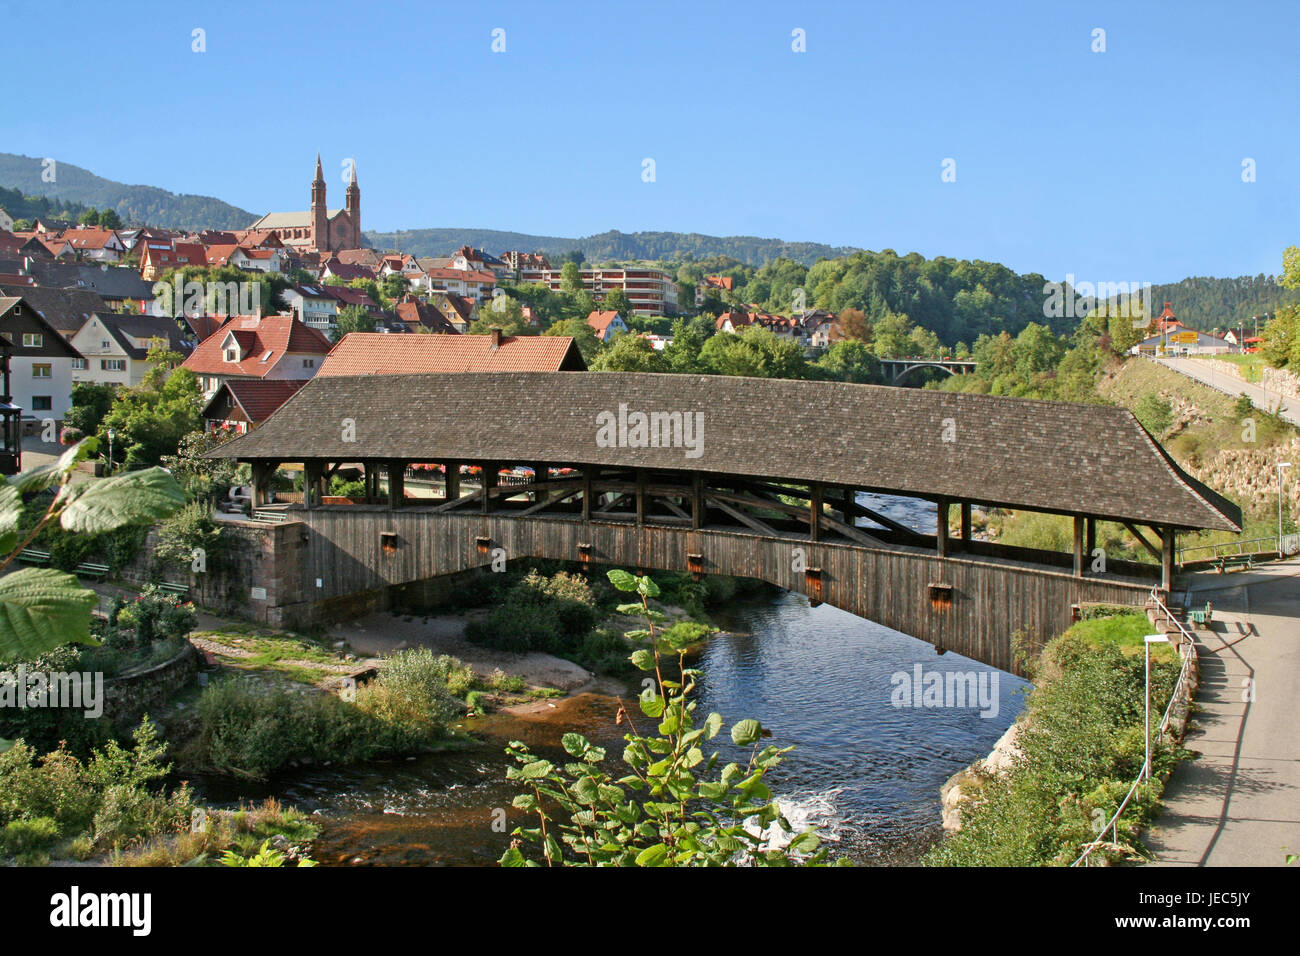 Germany, Baden-Wurttemberg, Forbach, Murg, historical wooden bridge, local view, river, water, bridge, woodwork, church, houses, residential houses, overview, wooden bridge, historically, Stock Photo